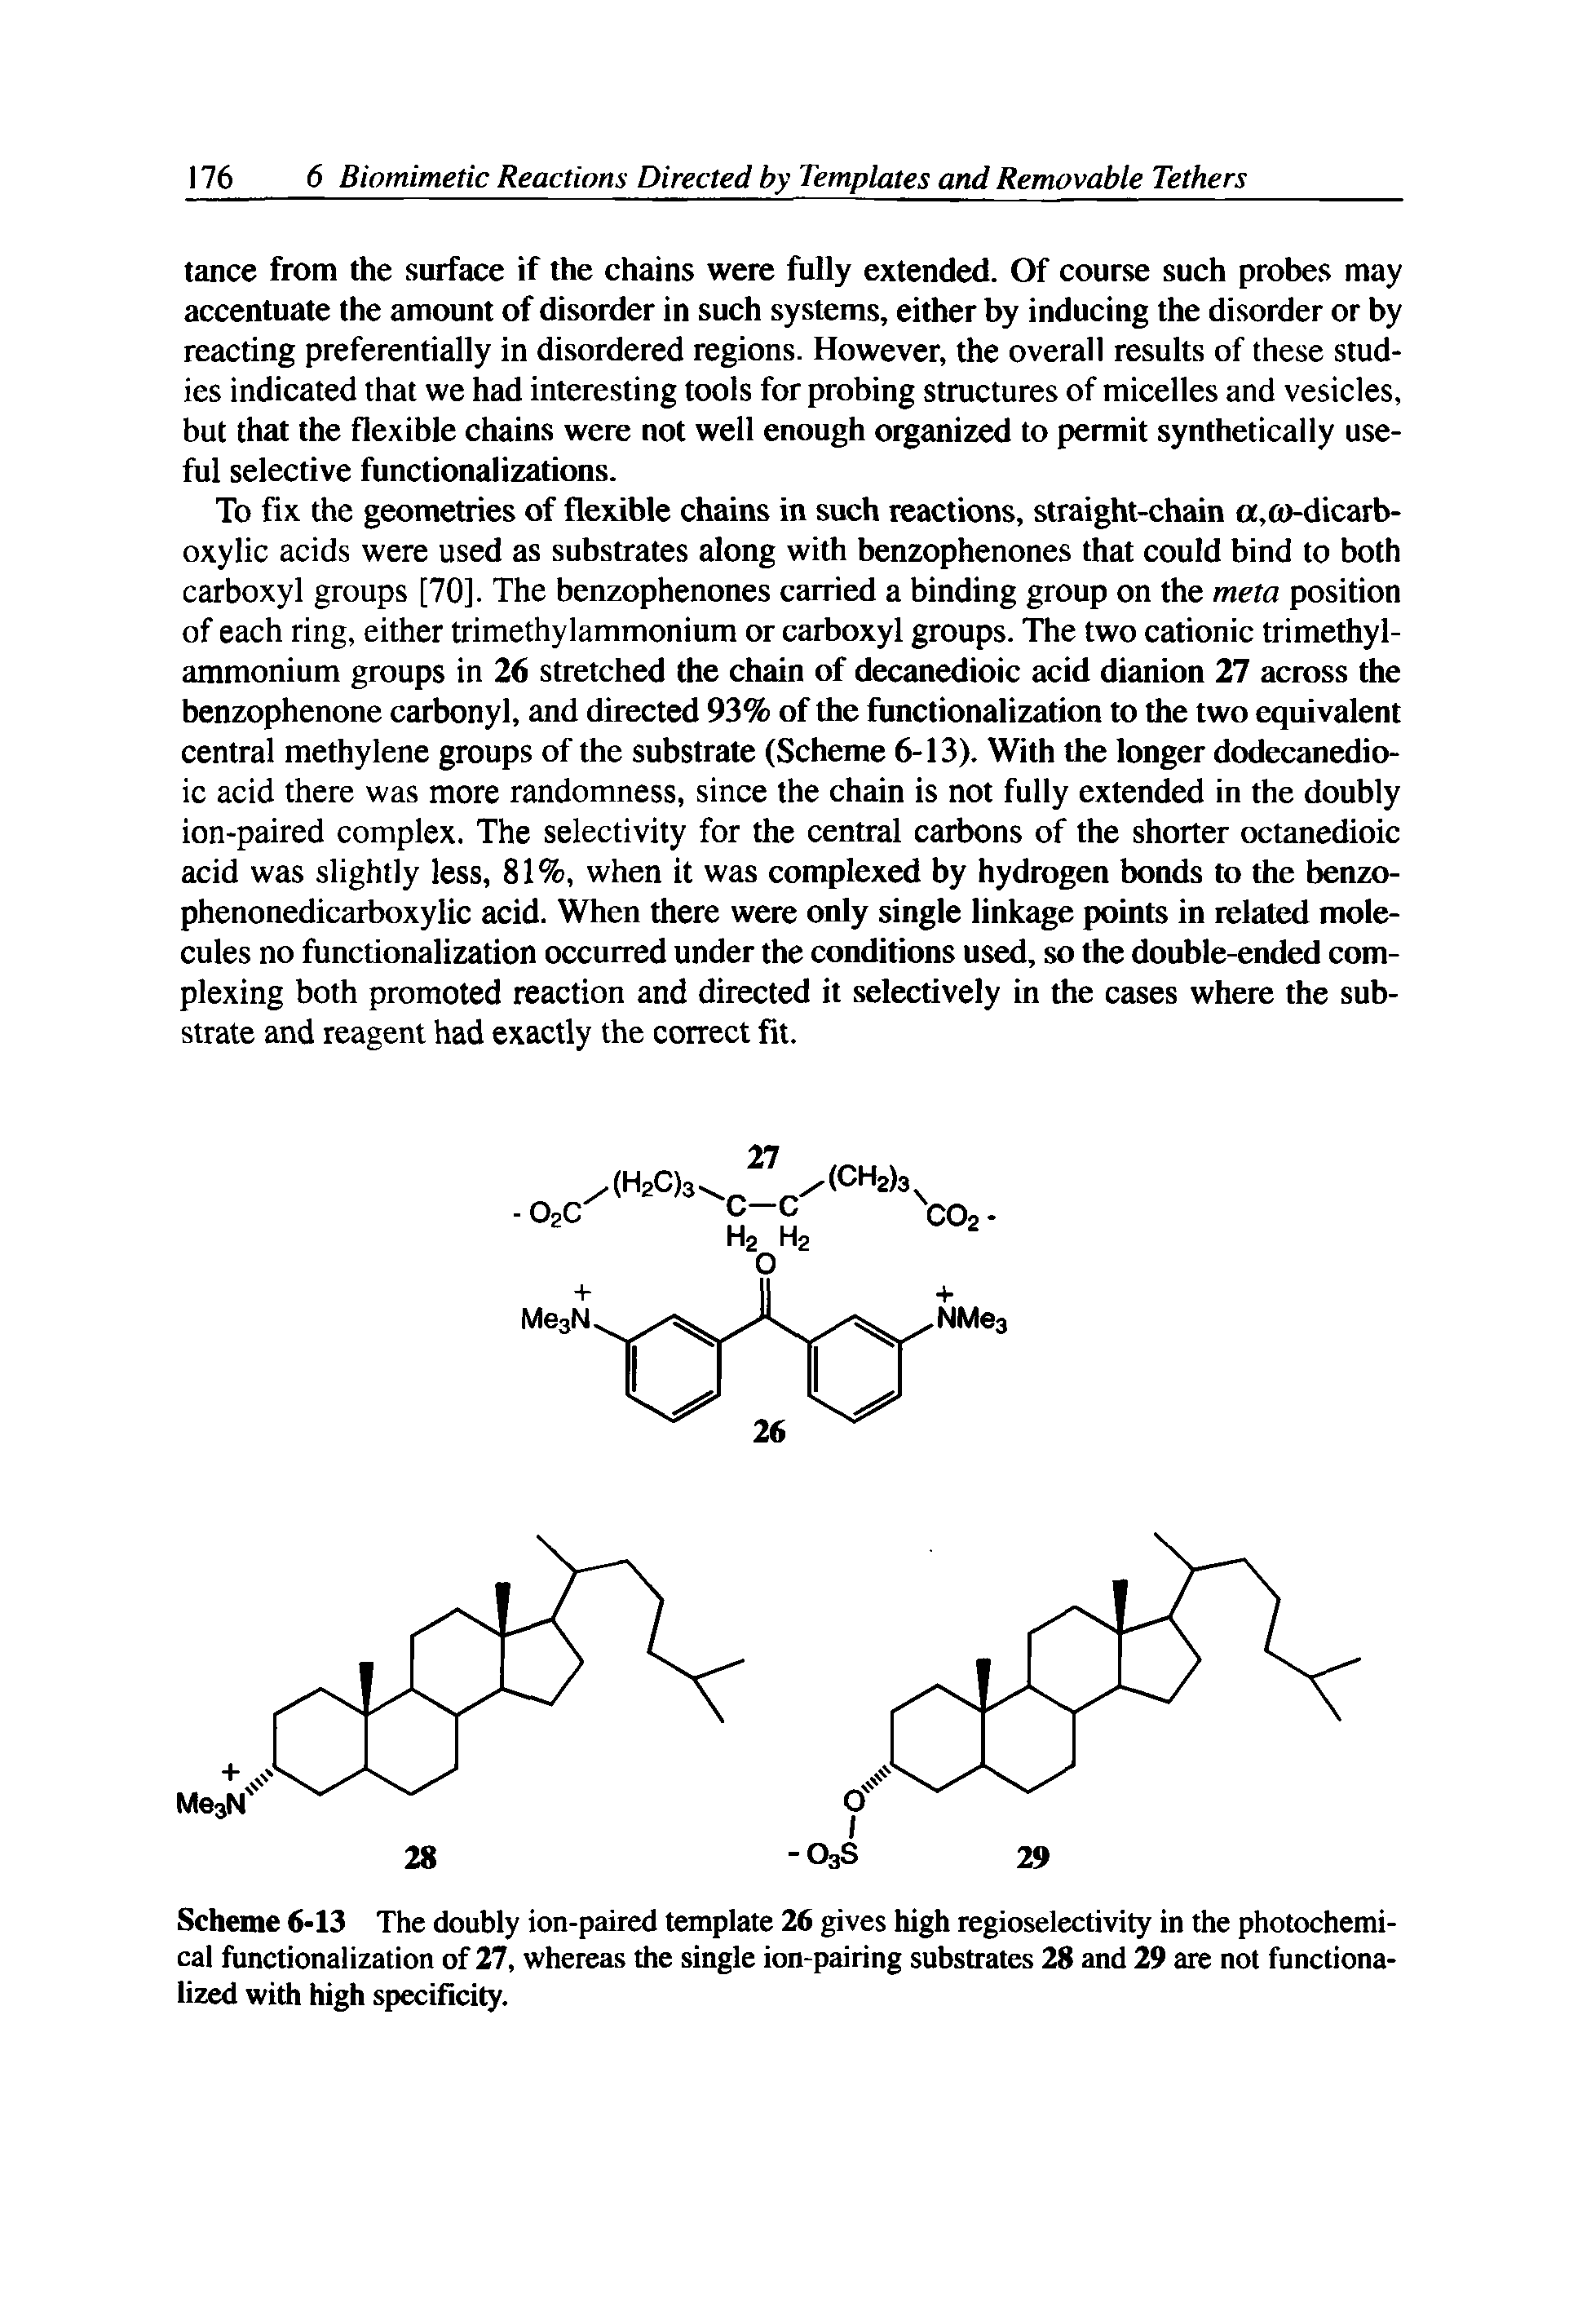 Scheme 6-13 The doubly ion-paired template 26 gives high regioselectivity in the photochemical functionalization of 27, whereas the single ion-pairing substrates 28 and 29 are not functionalized with high specificity.